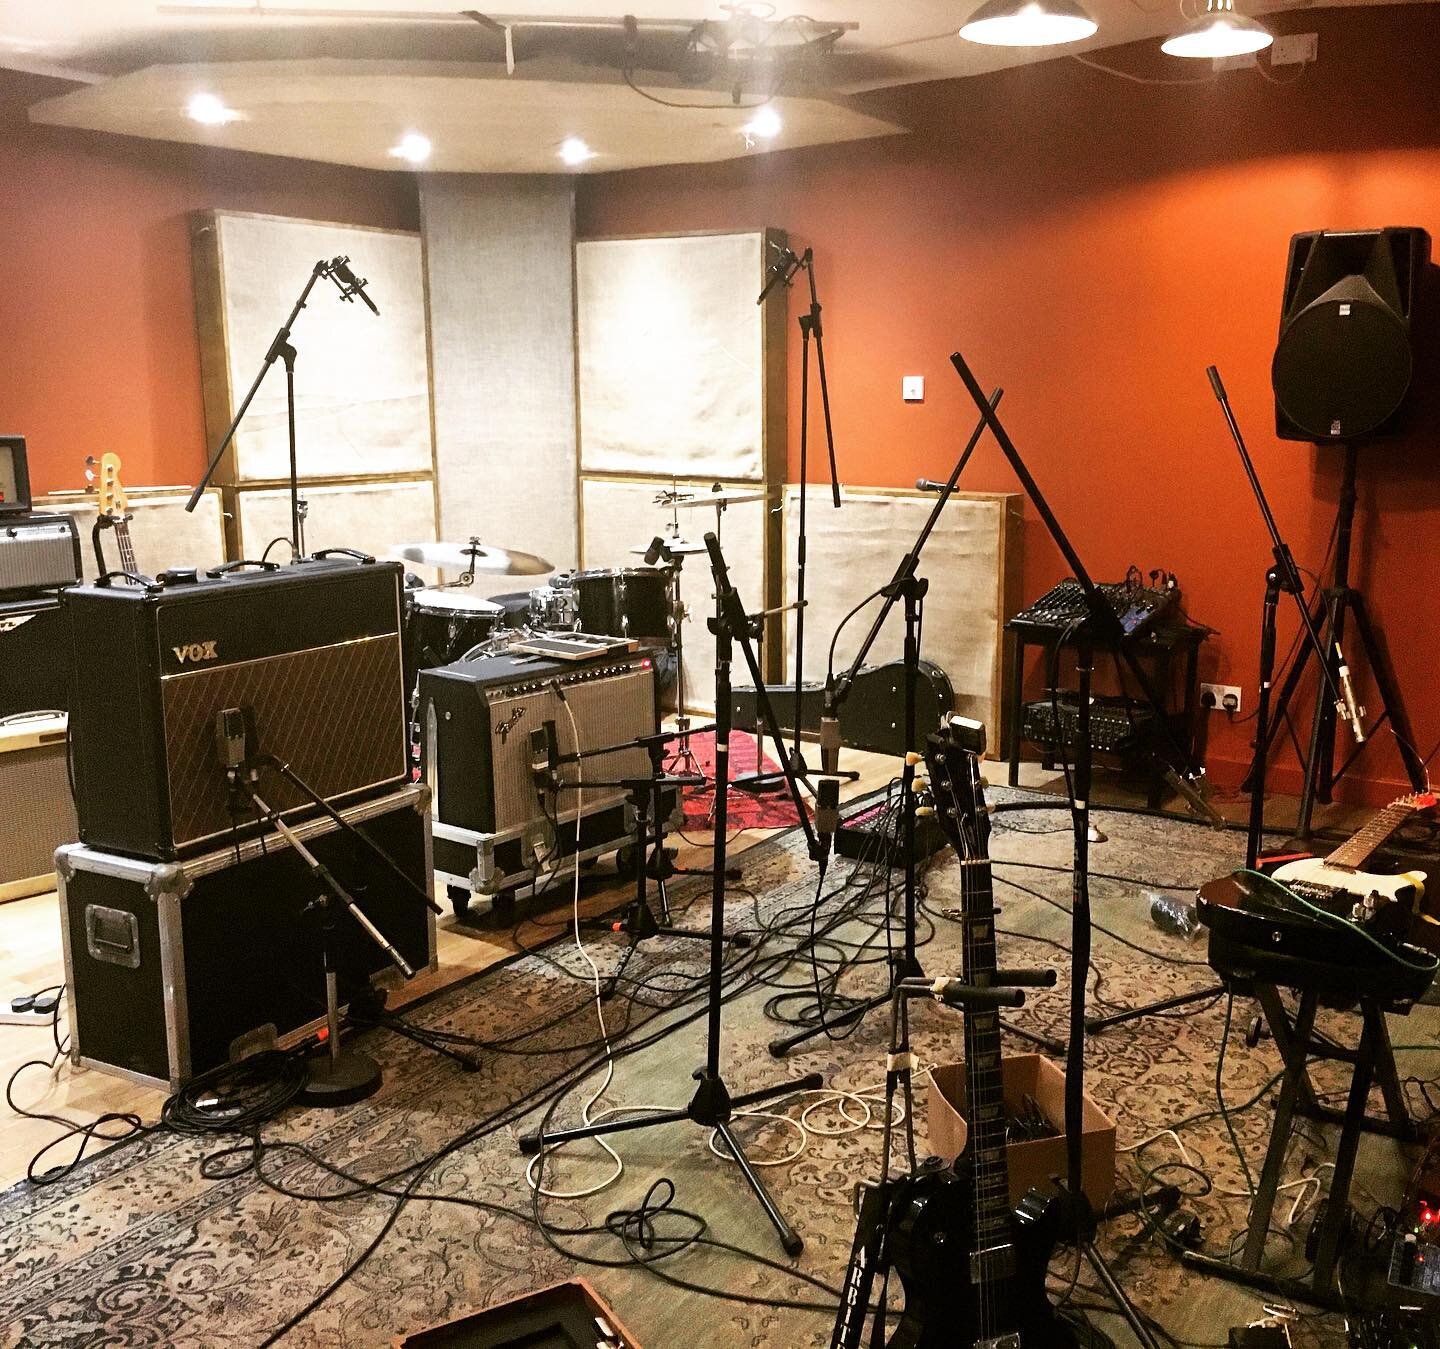 Throwback to a recording session making a lot of great noise.

#recording #studio #studiolife